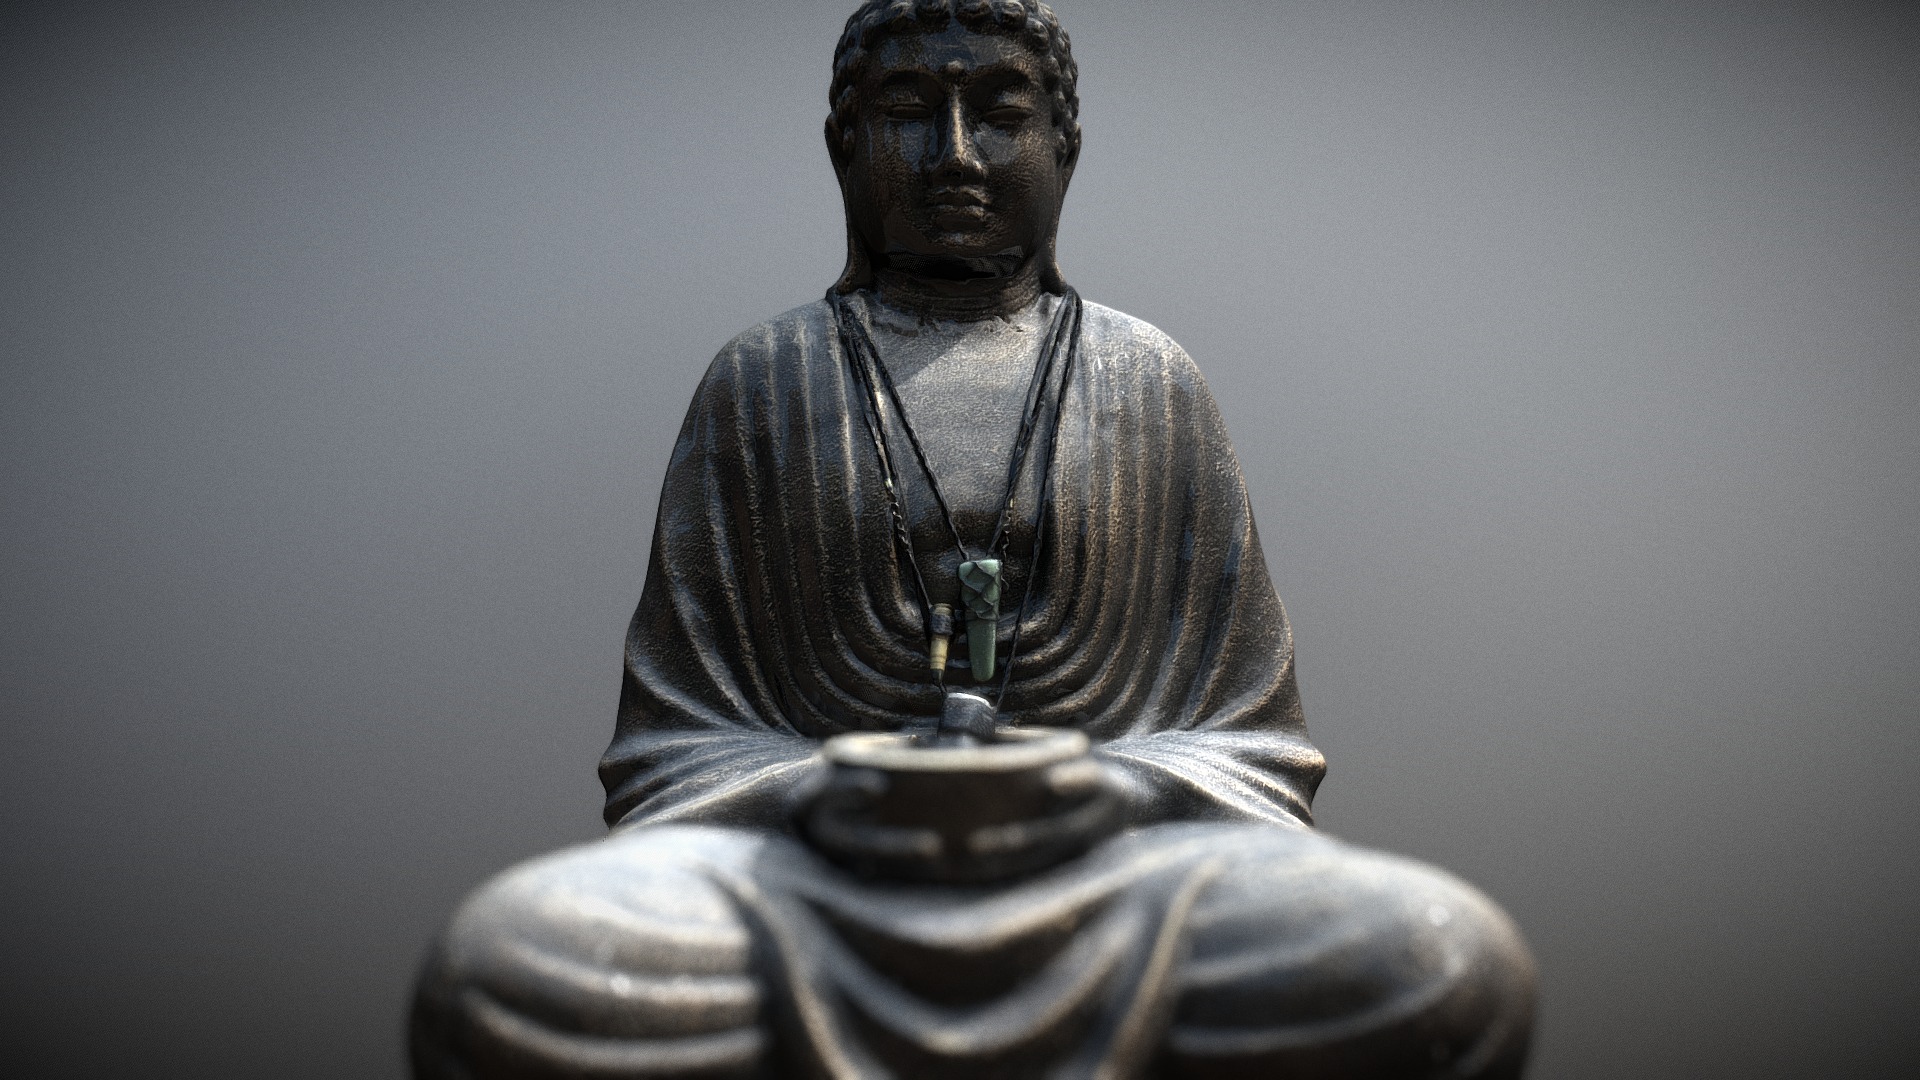 3D model Statue Buddha iPhone X - This is a 3D model of the Statue Buddha iPhone X. The 3D model is about a statue of a man.